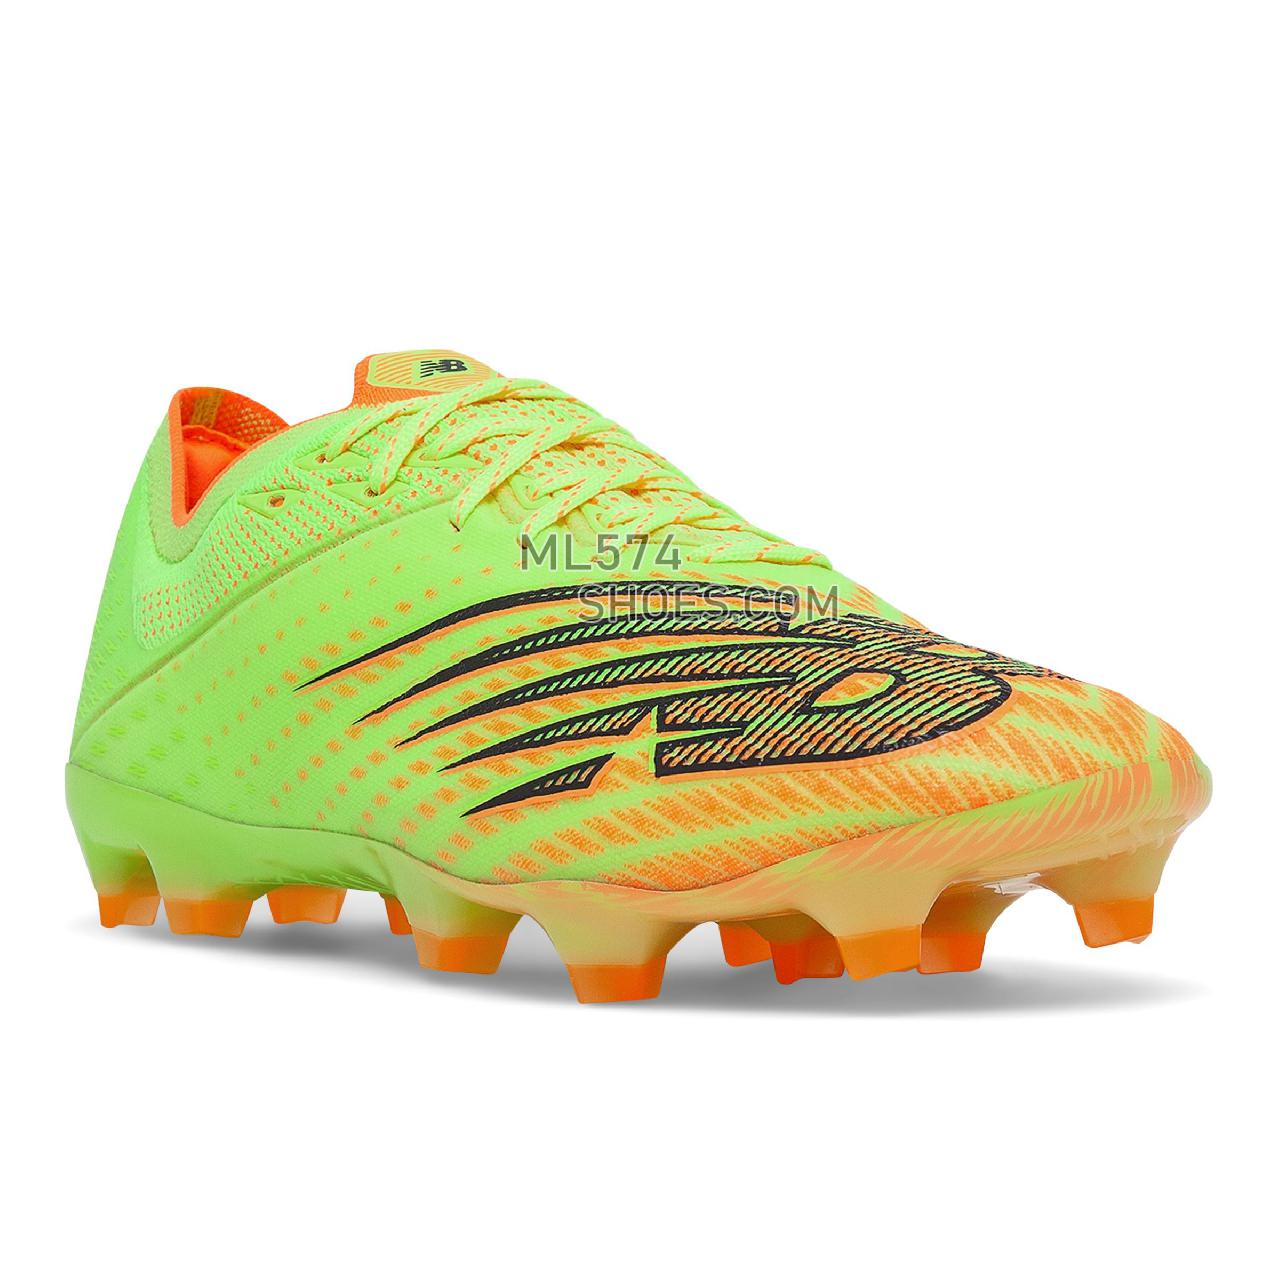 New Balance Furon v6+ Pro FG - Men's Soccer - Bleached Lime Glo with Citrus Punch - MSF1FS65